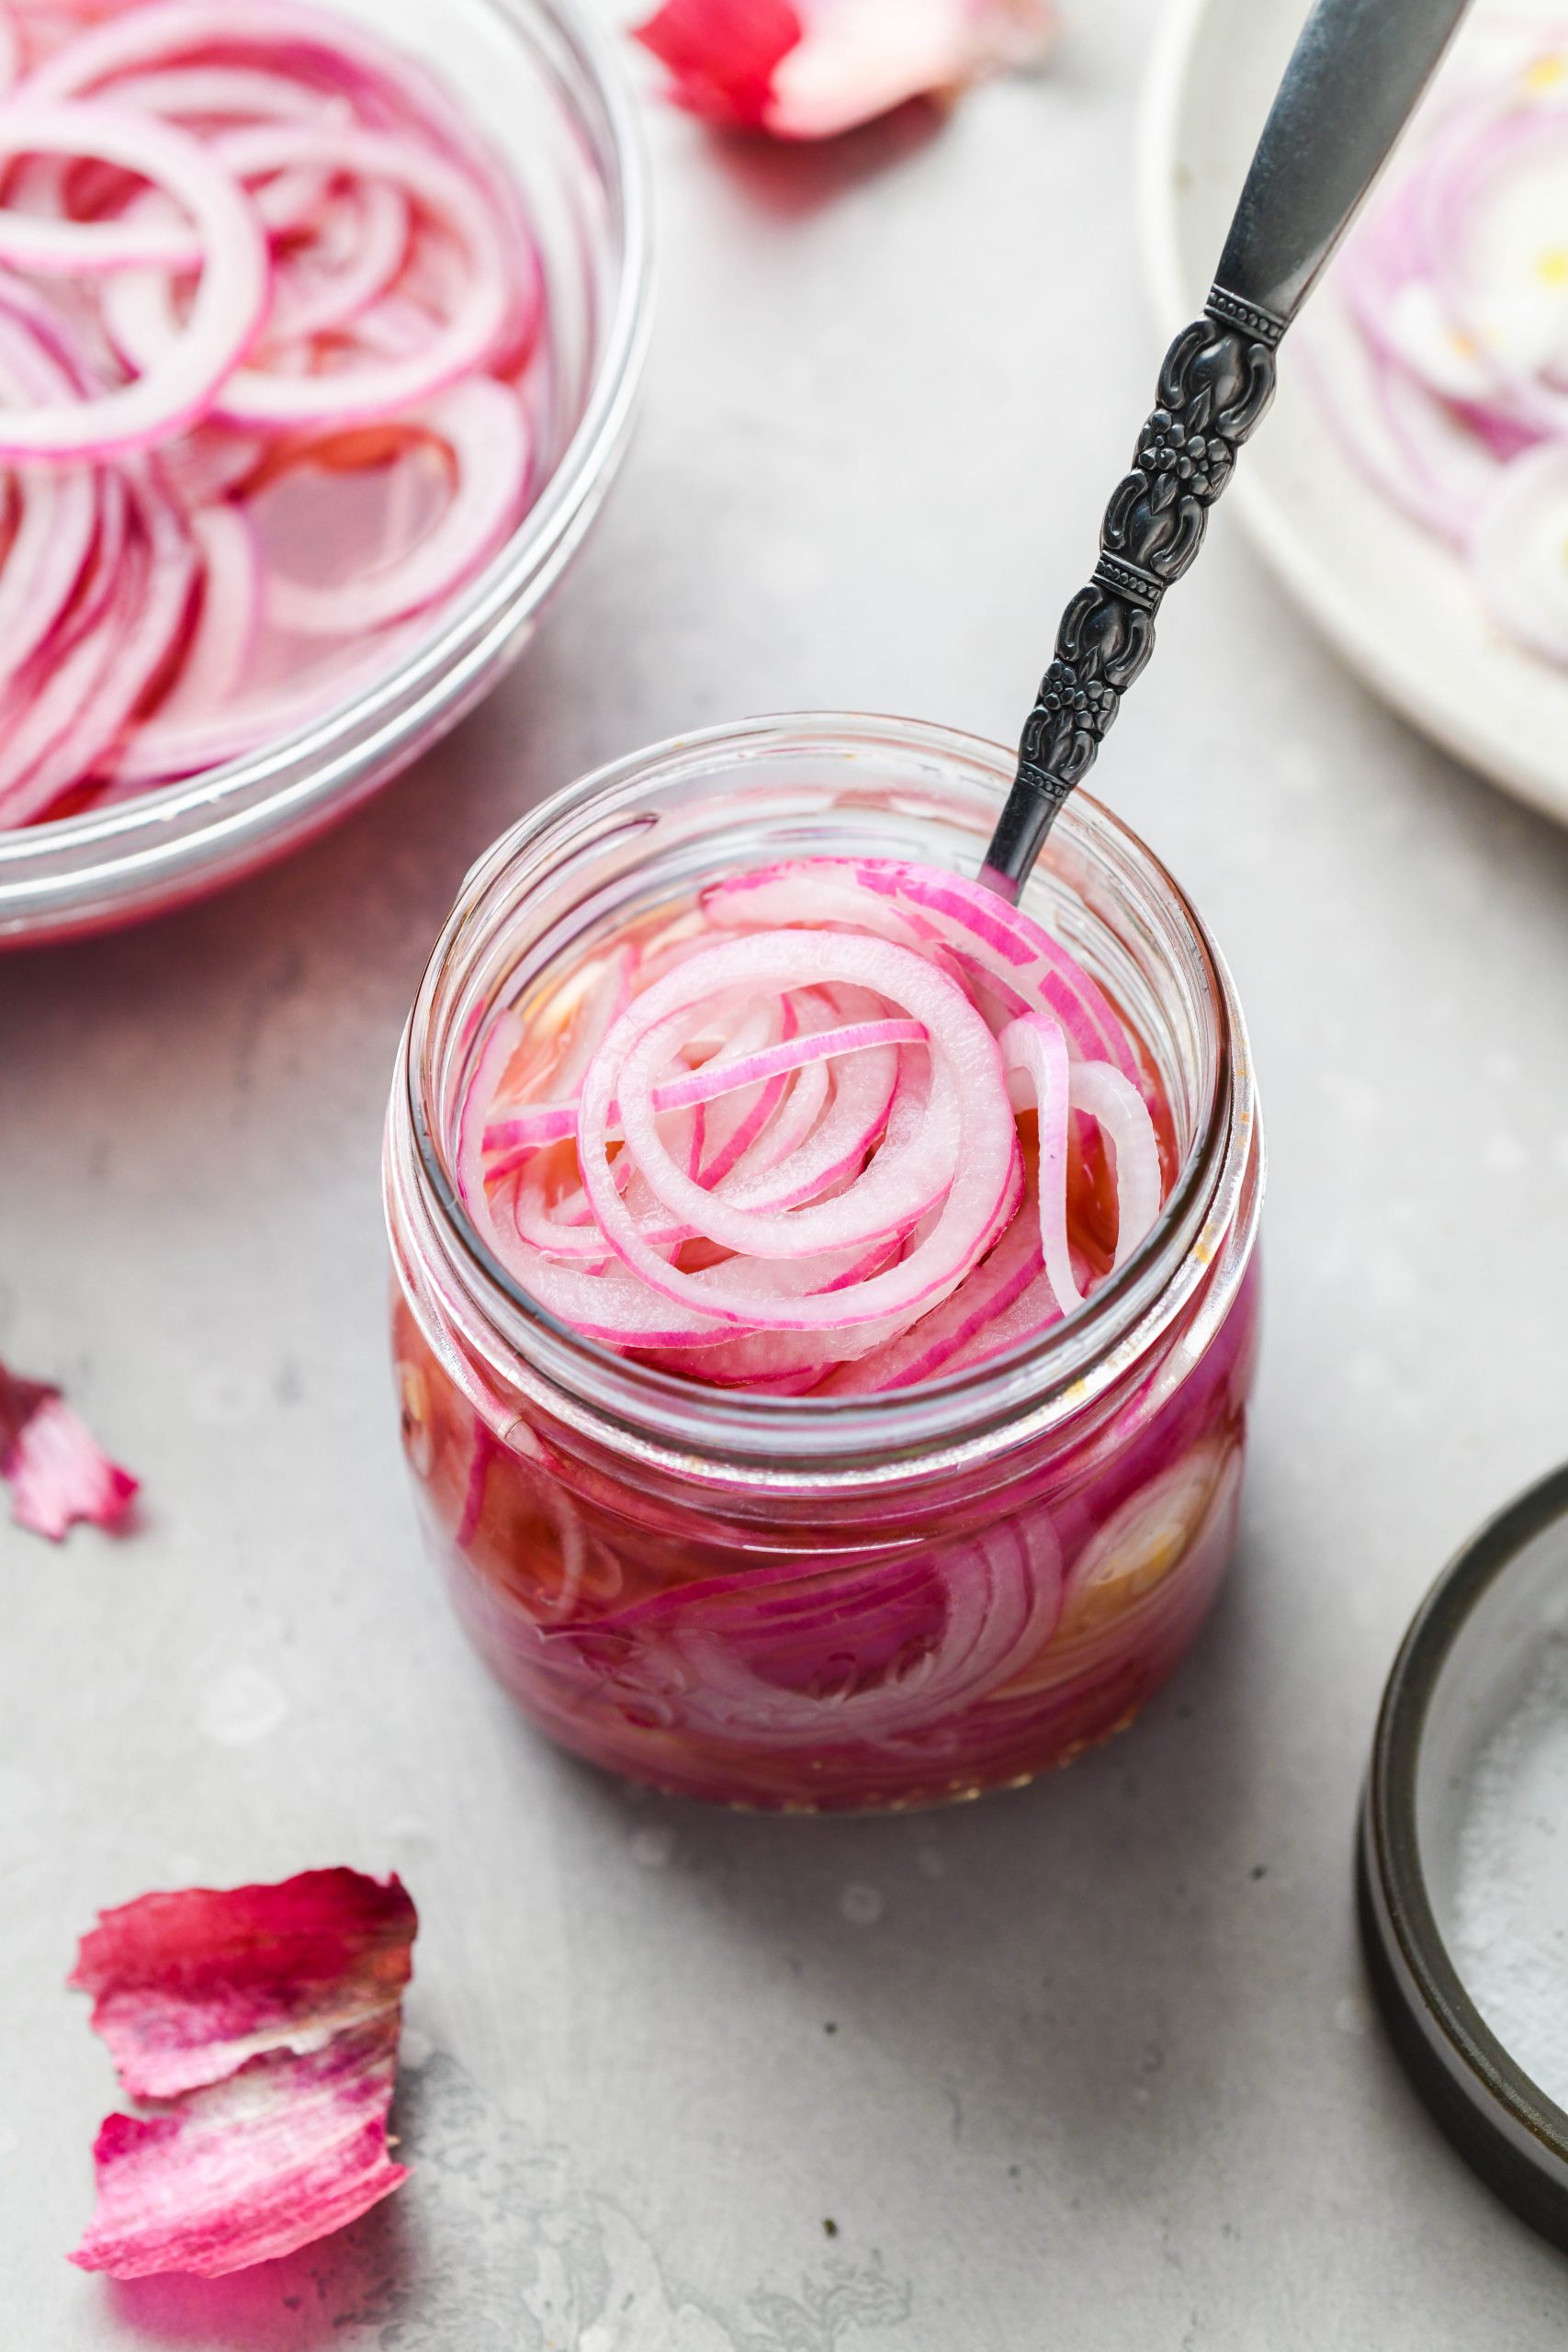 https://nyssaskitchen.com/wp-content/uploads/2021/04/Pickled-Red-Onions-19-scaled.jpg